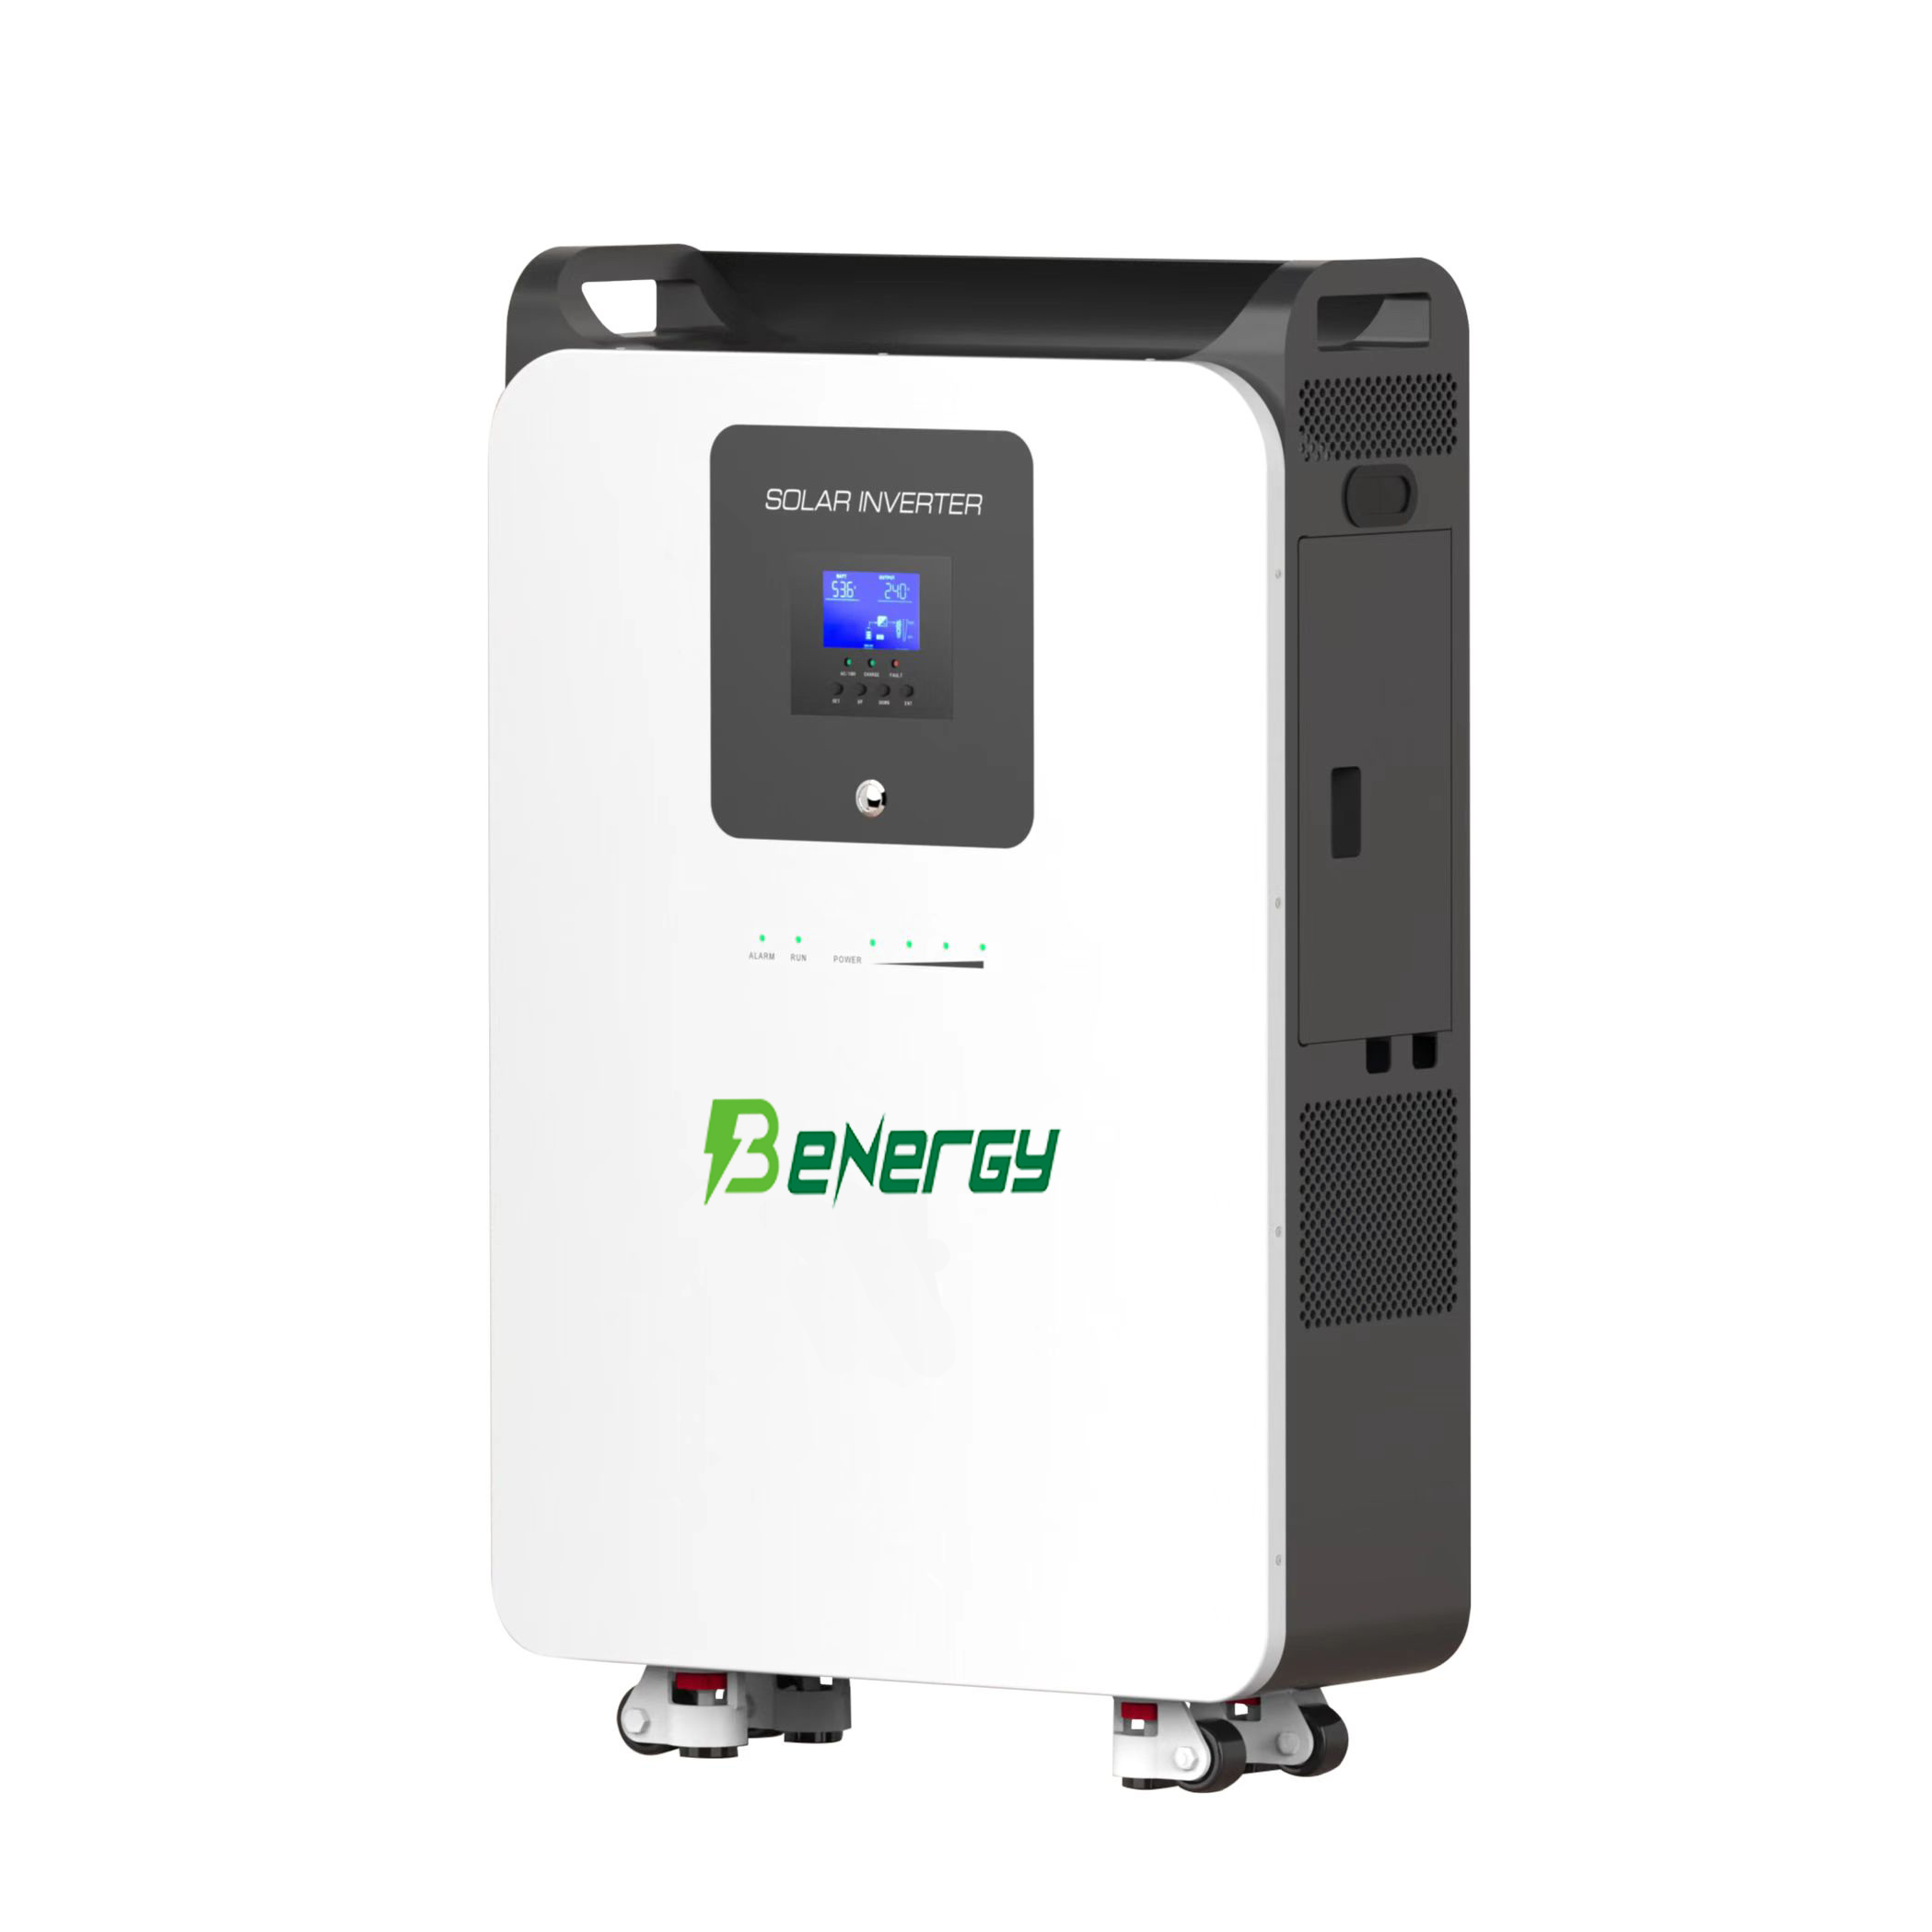 Benergy developed Lithium Battery 5KWH all in one system for household solar system